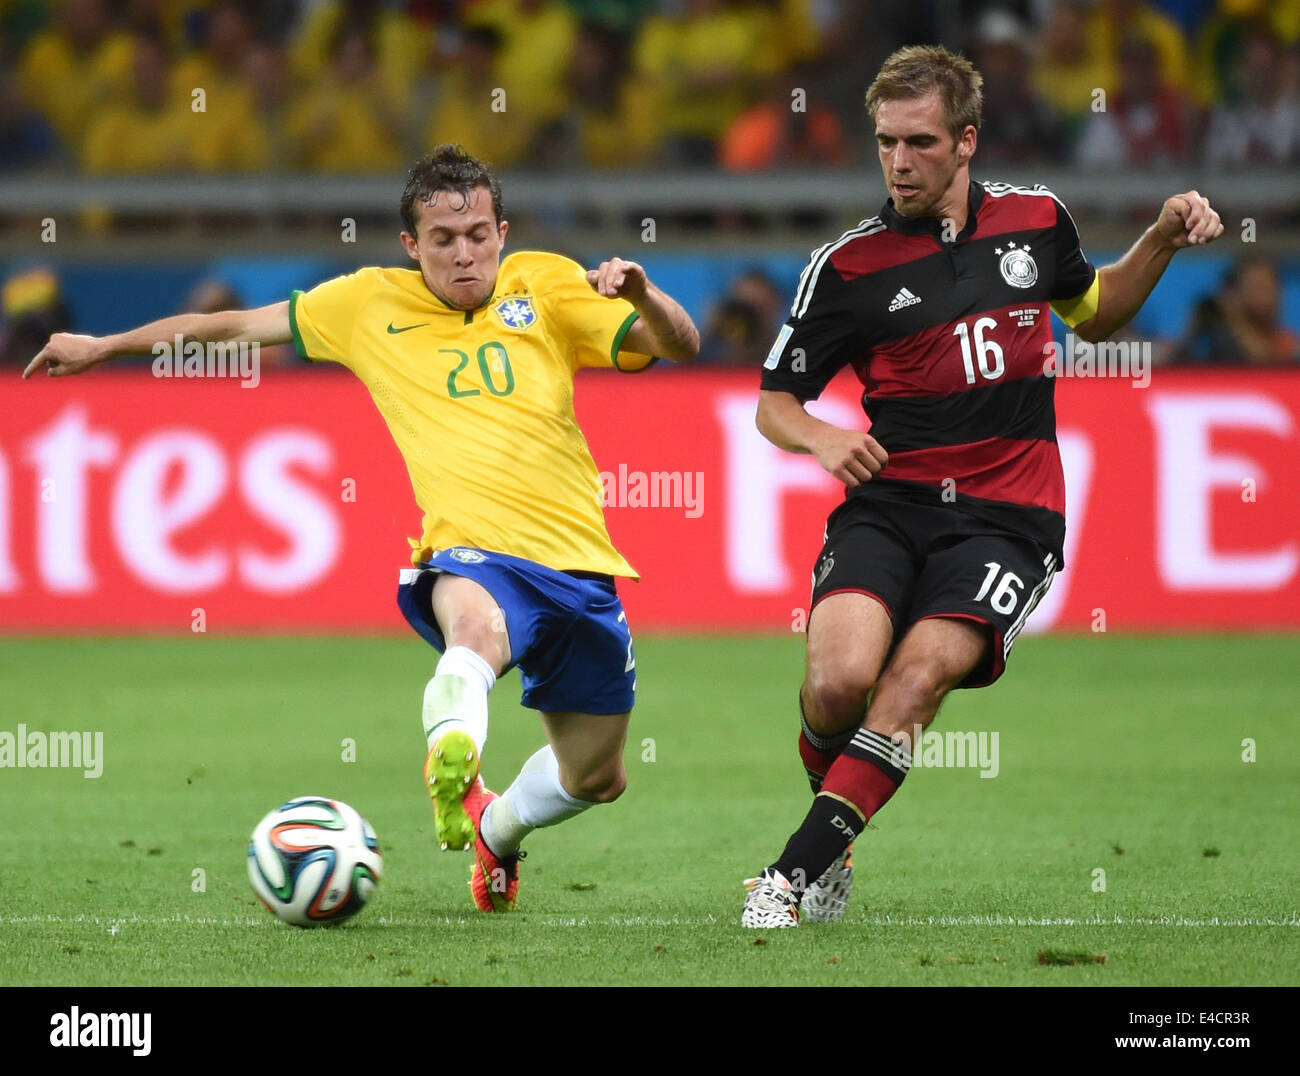 Belo Horizonte, Brazil. 8th July, 2014. Brazil's Bernard vies with Germany's Philipp Lahm during a semifinal match between Brazil and Germany of 2014 FIFA World Cup at the Estadio Mineirao Stadium in Belo Horizonte, Brazil, on July 8, 2014. Credit:  Li Ga/Xinhua/Alamy Live News Stock Photo